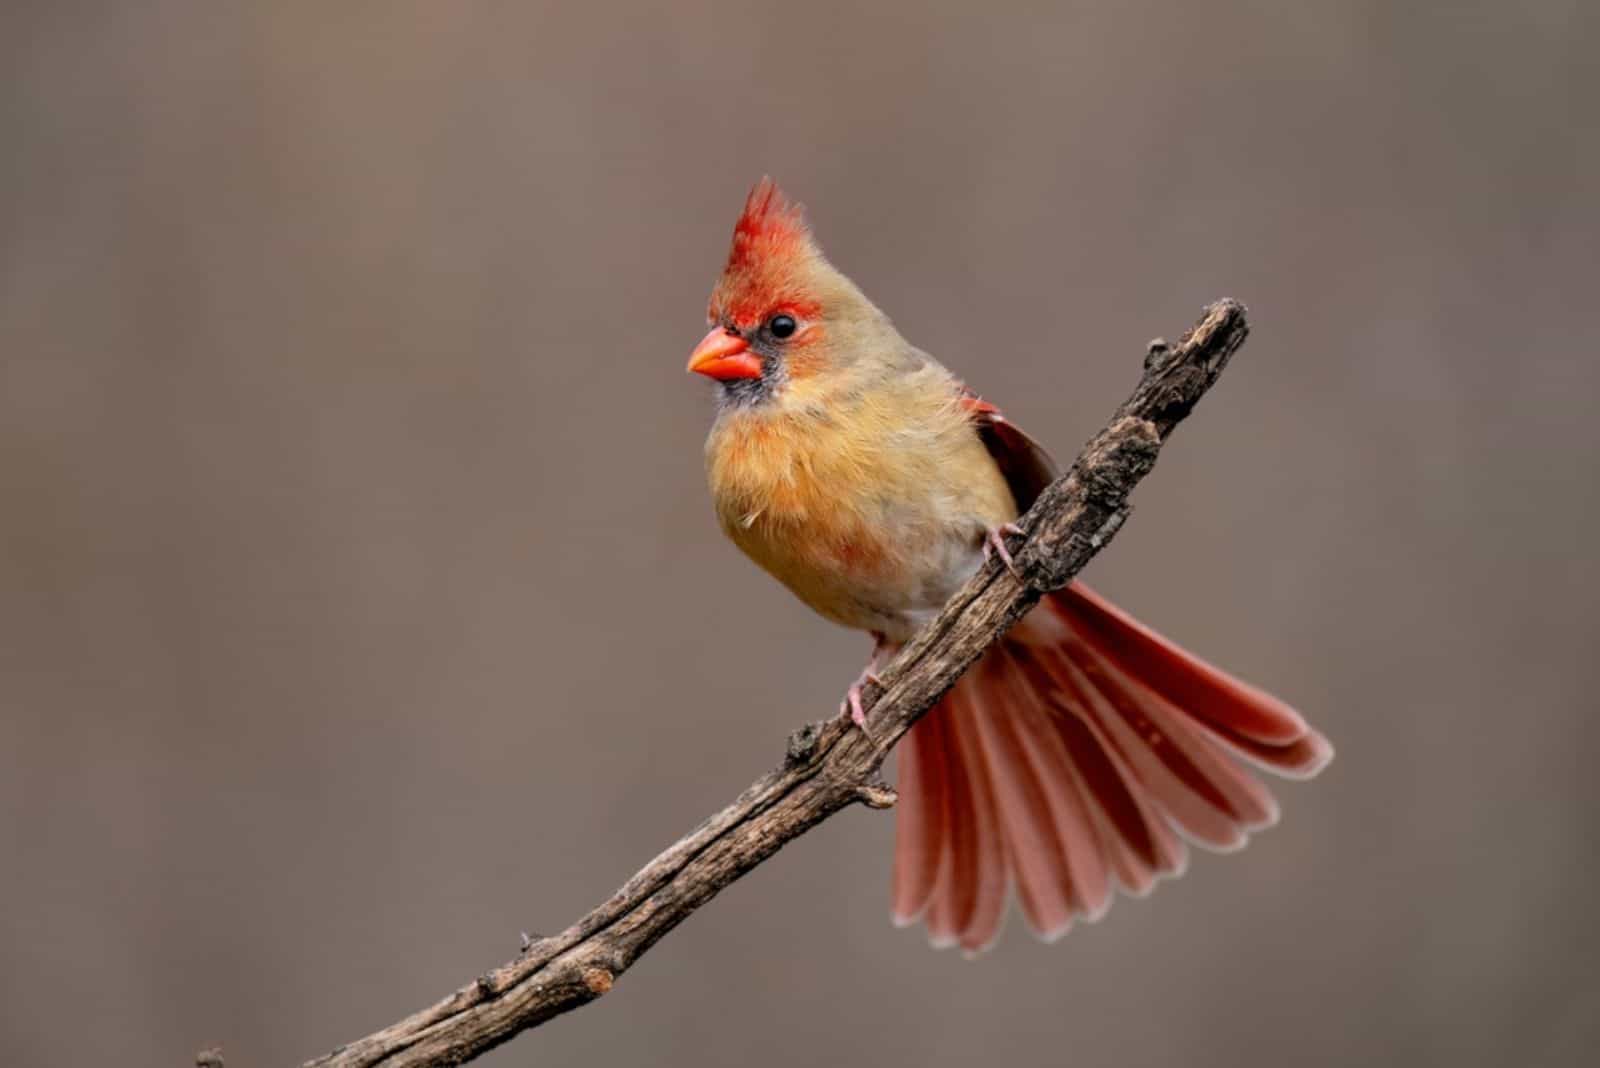 If You Want To Attract Cardinals To Your Yard, Follow These 5 Brilliant Tips